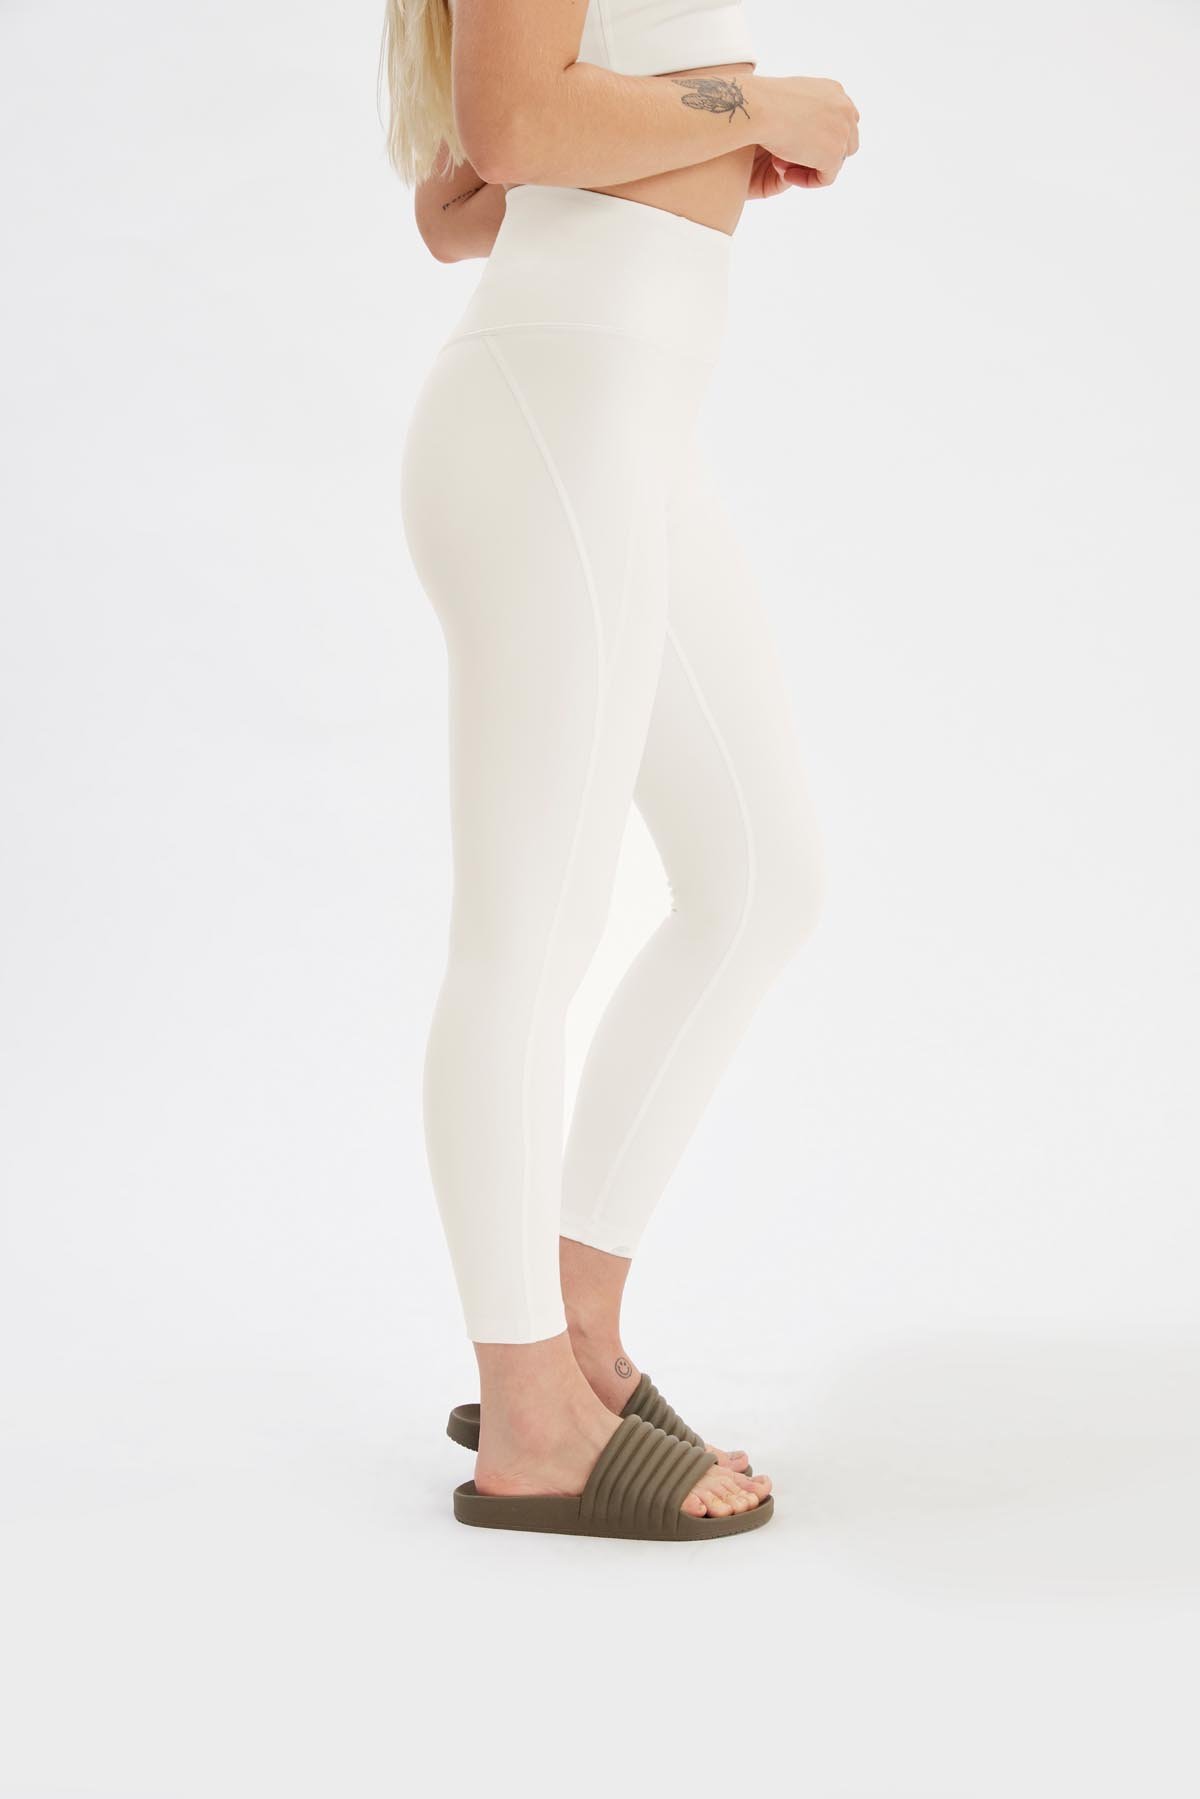 Girlfriend Collective Smoke grey Compressive High-Rise Legging Size XL -  $30 (61% Off Retail) - From Kao